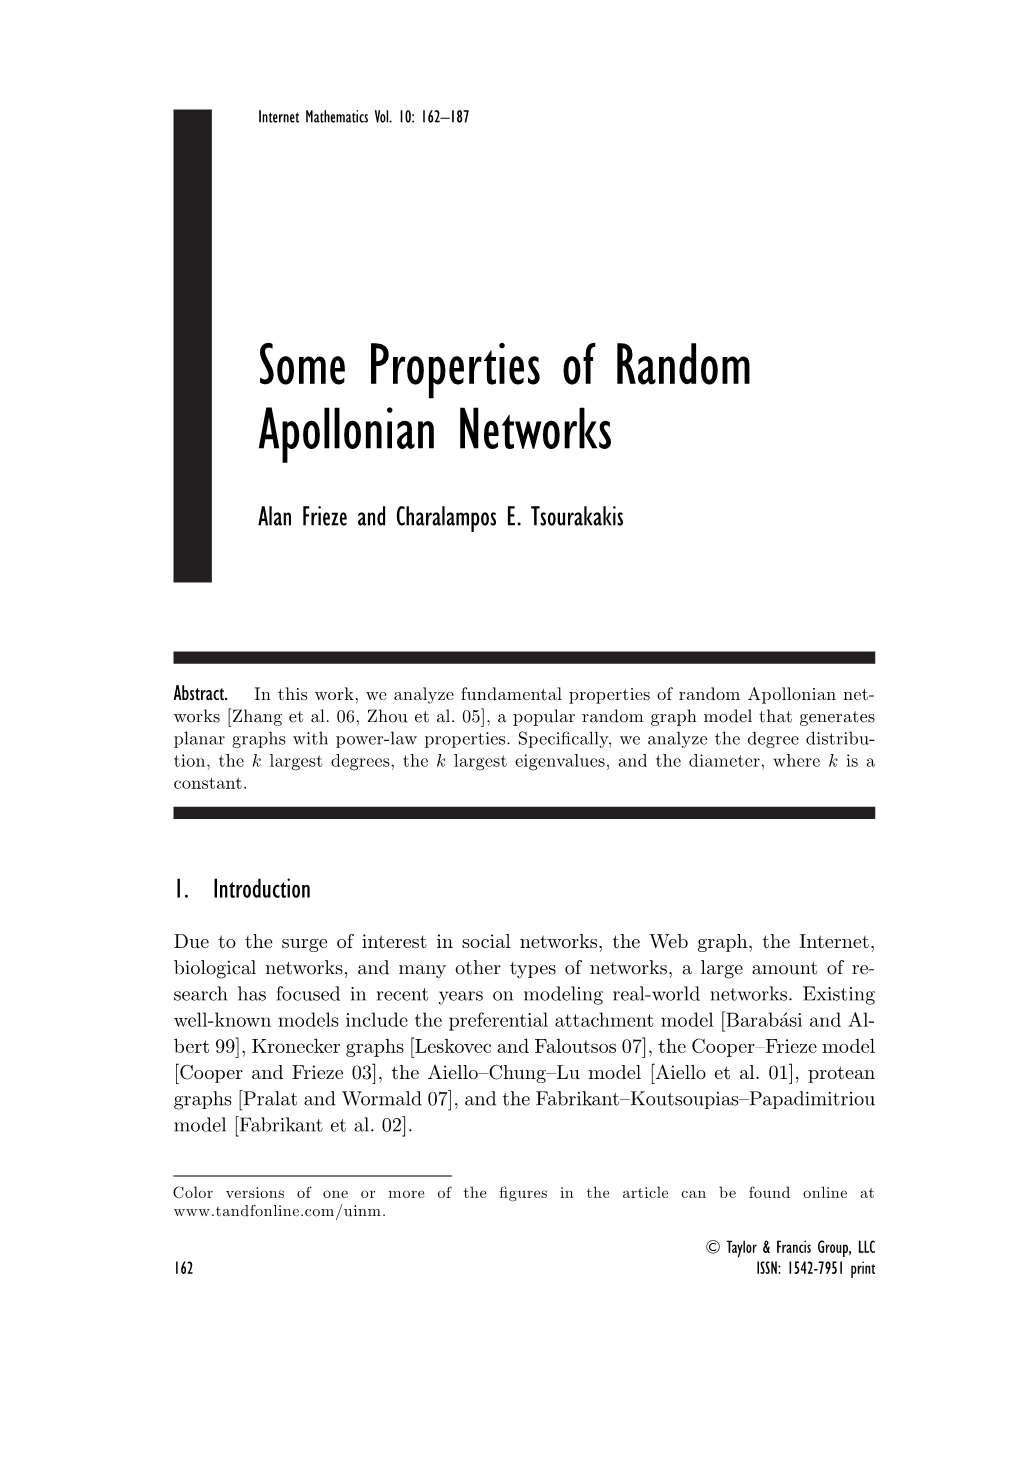 Some Properties of Random Apollonian Networks